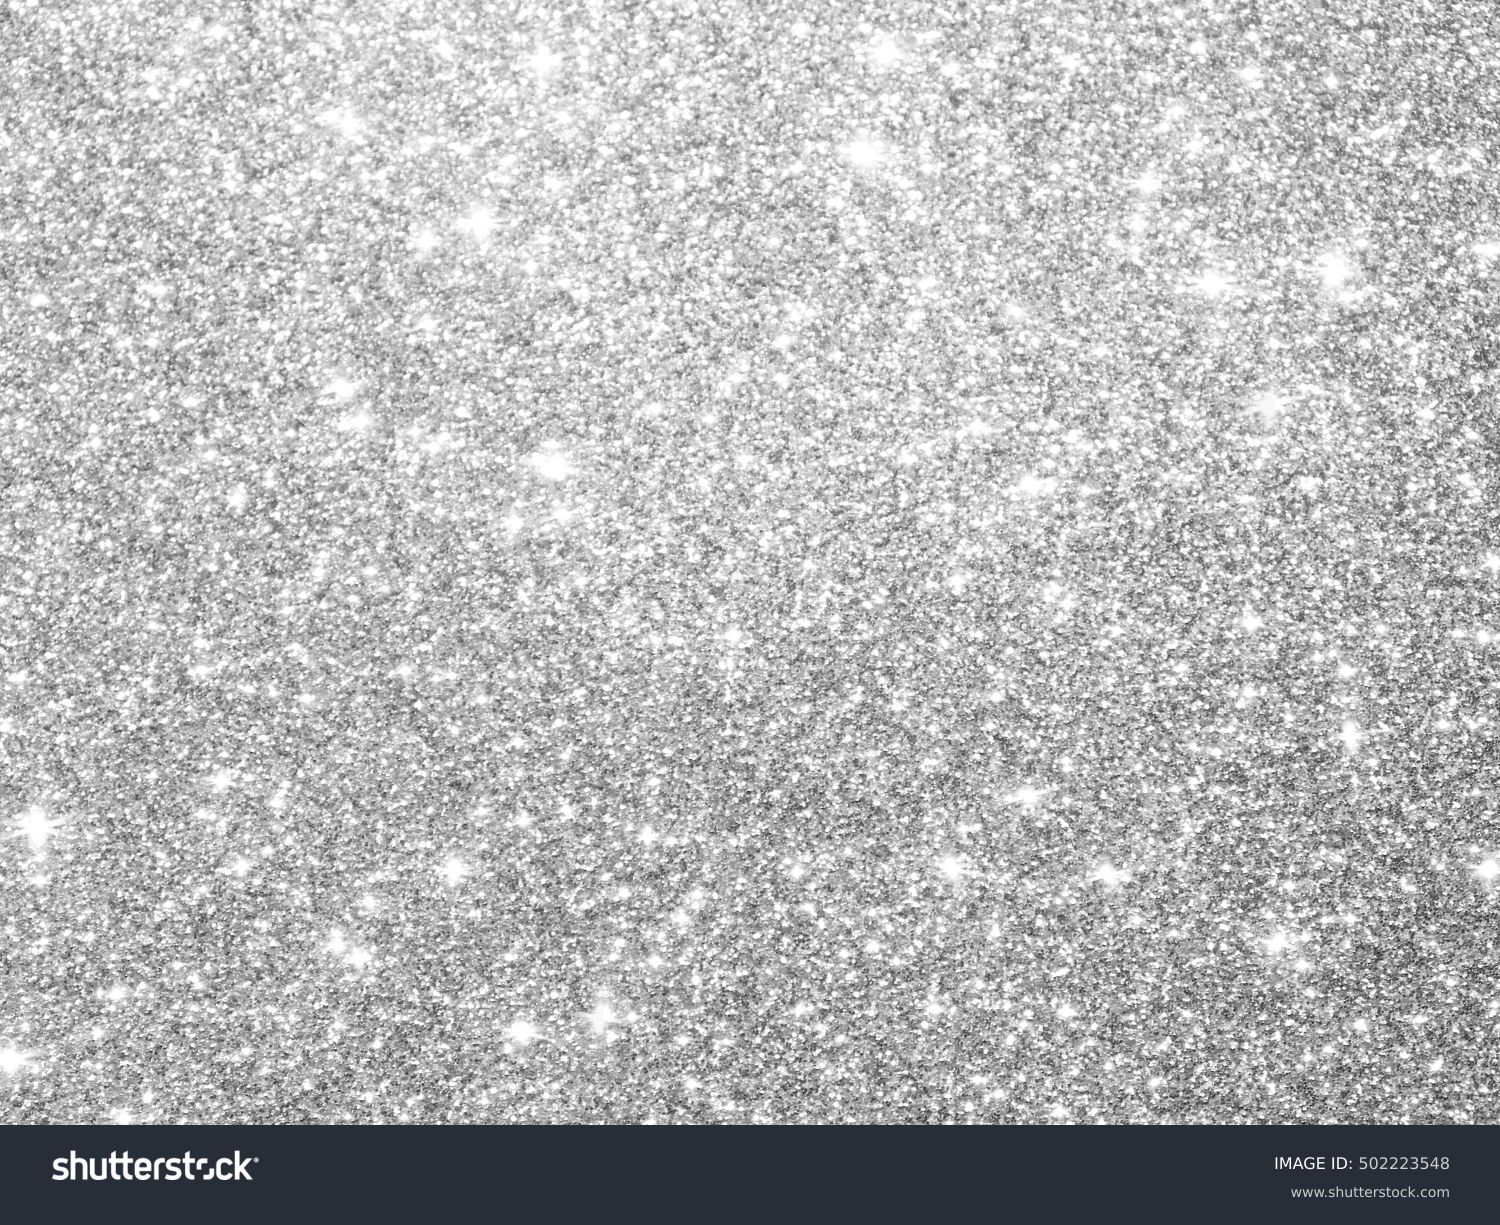 Silver Sparkle Wallpaper for Christmas #502223548